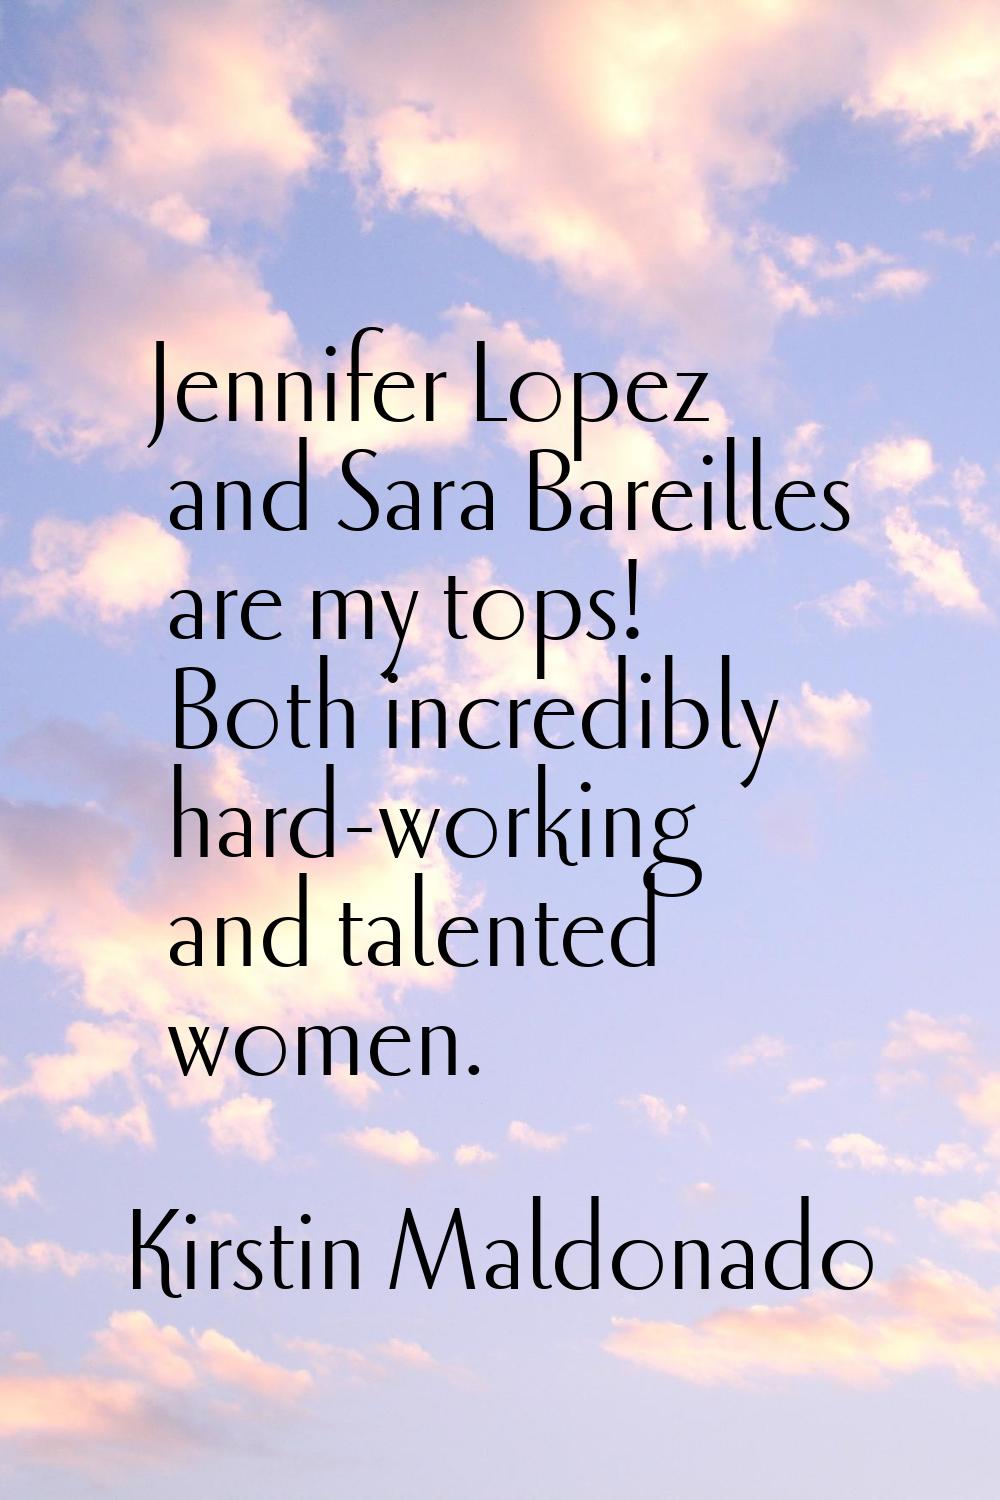 Jennifer Lopez and Sara Bareilles are my tops! Both incredibly hard-working and talented women.